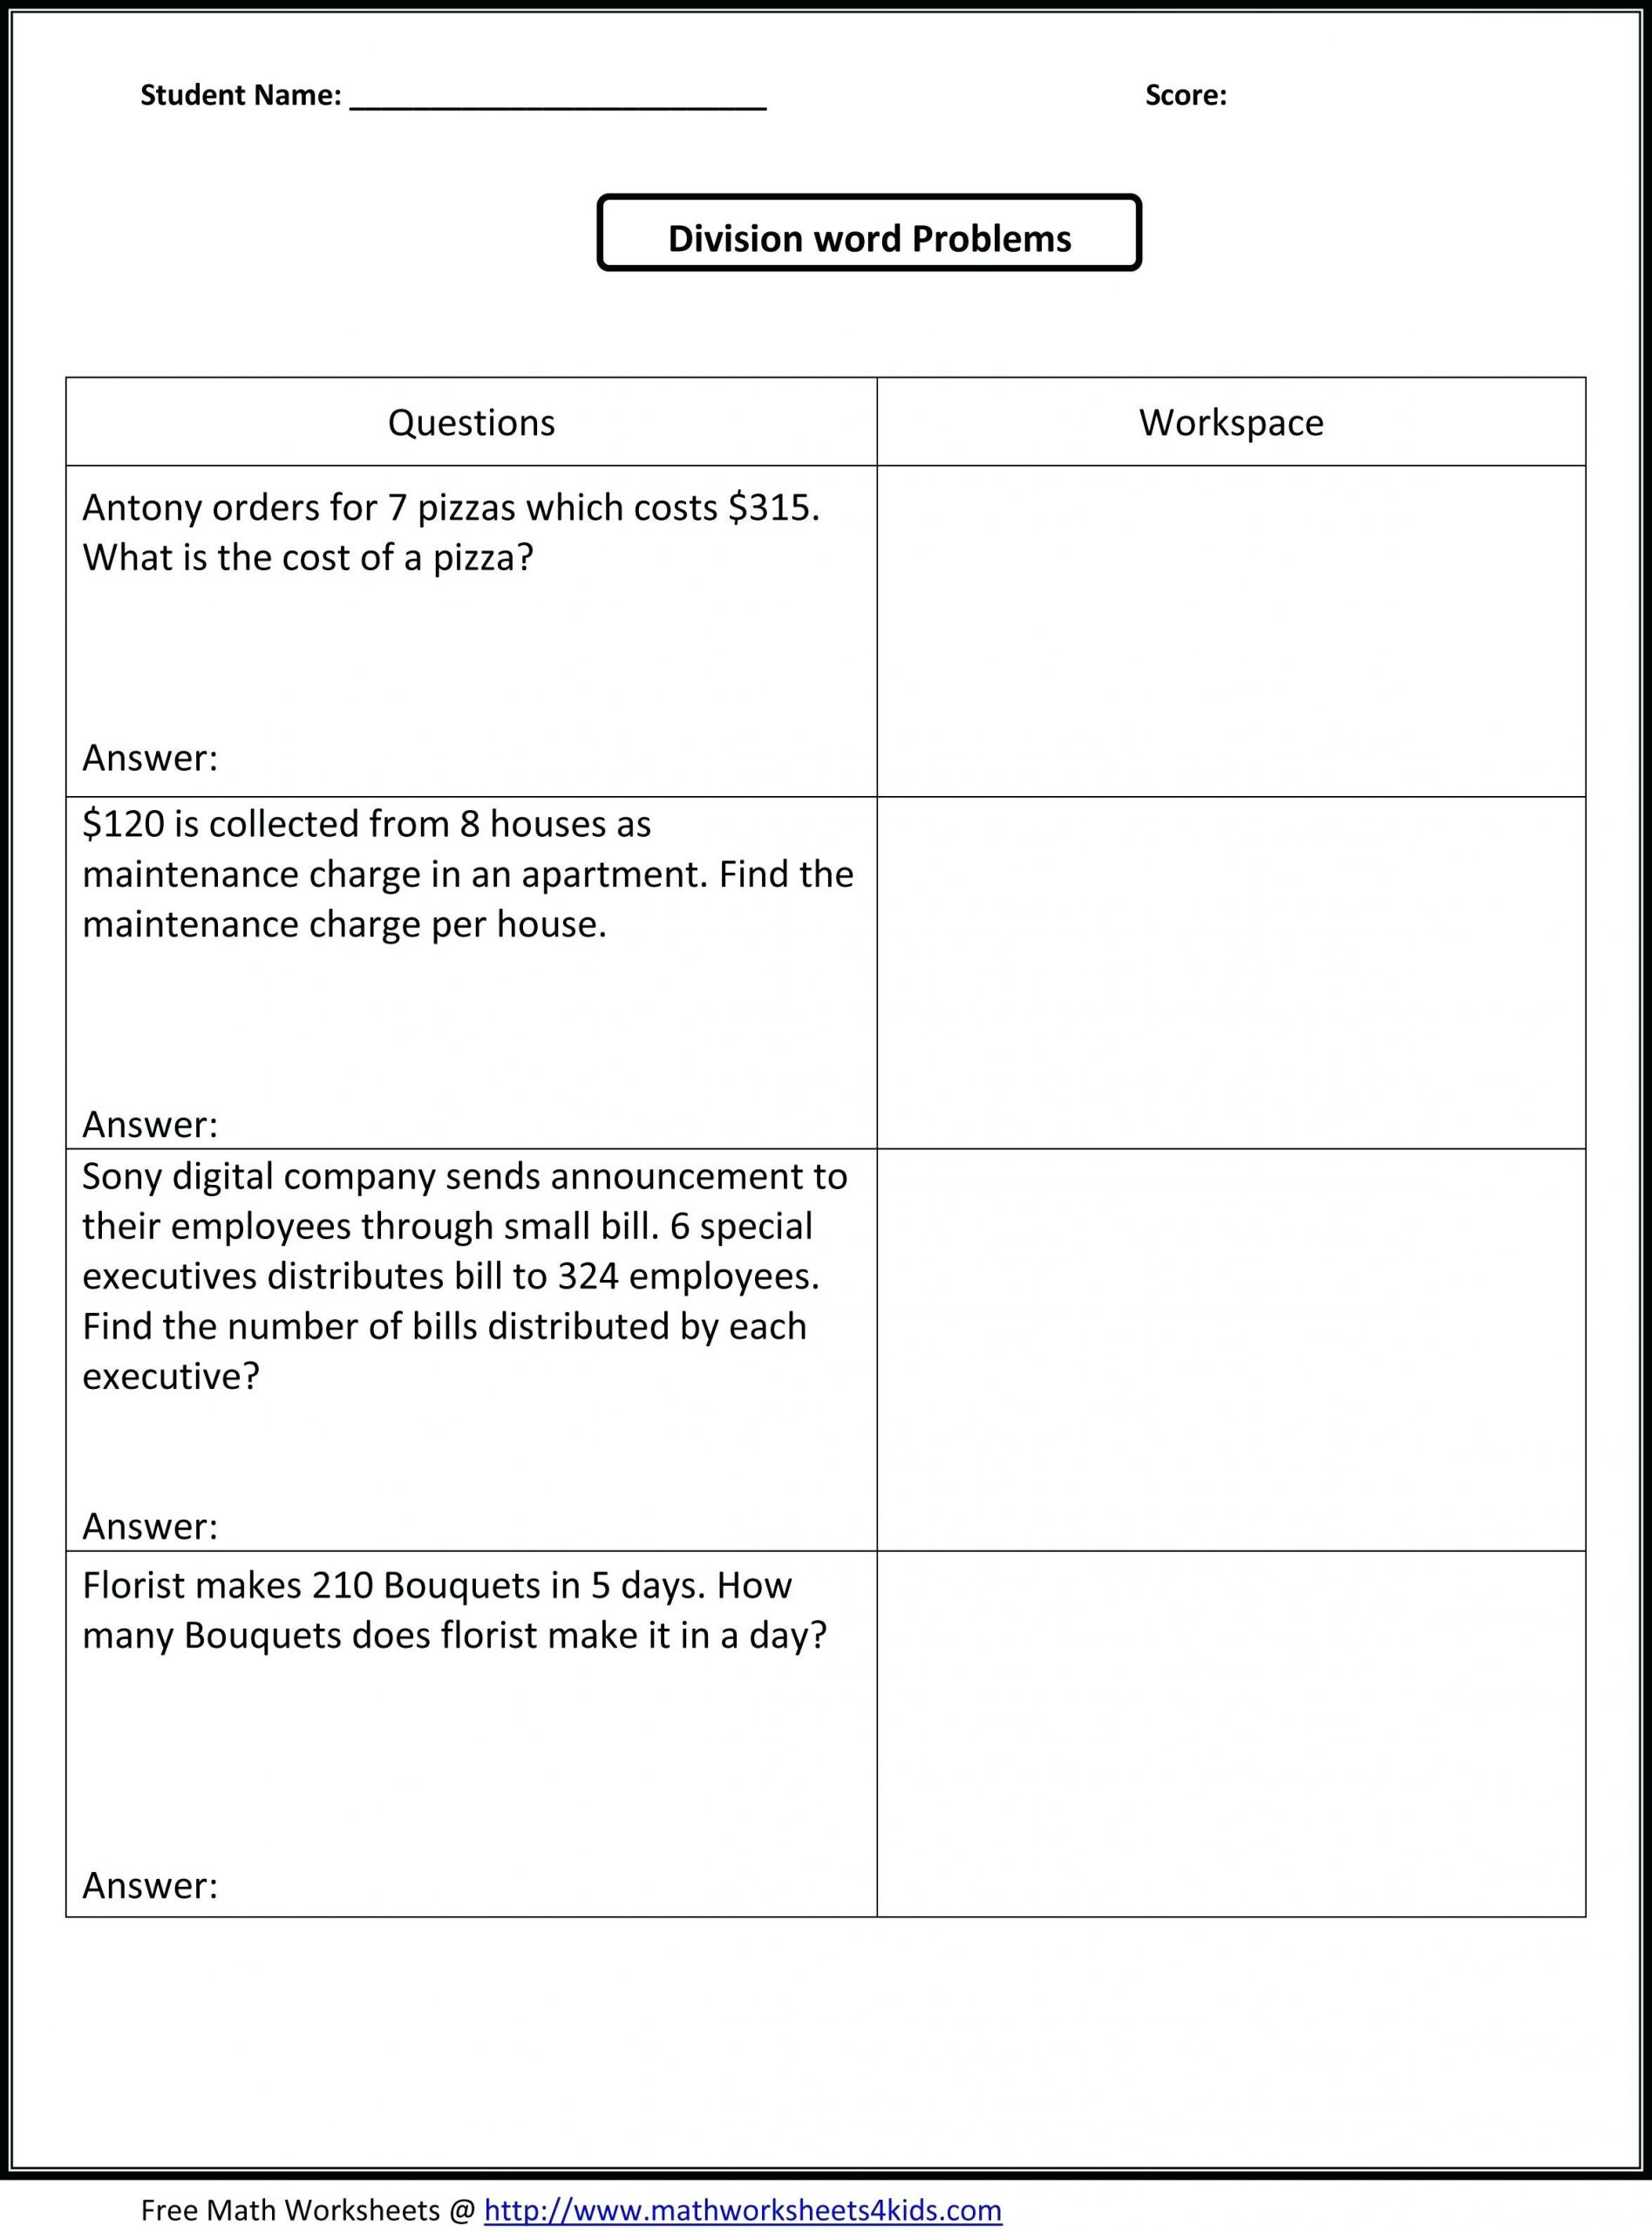 3 Free Math Worksheets First Grade 1 Subtraction Subtracting Whole Tens AMP